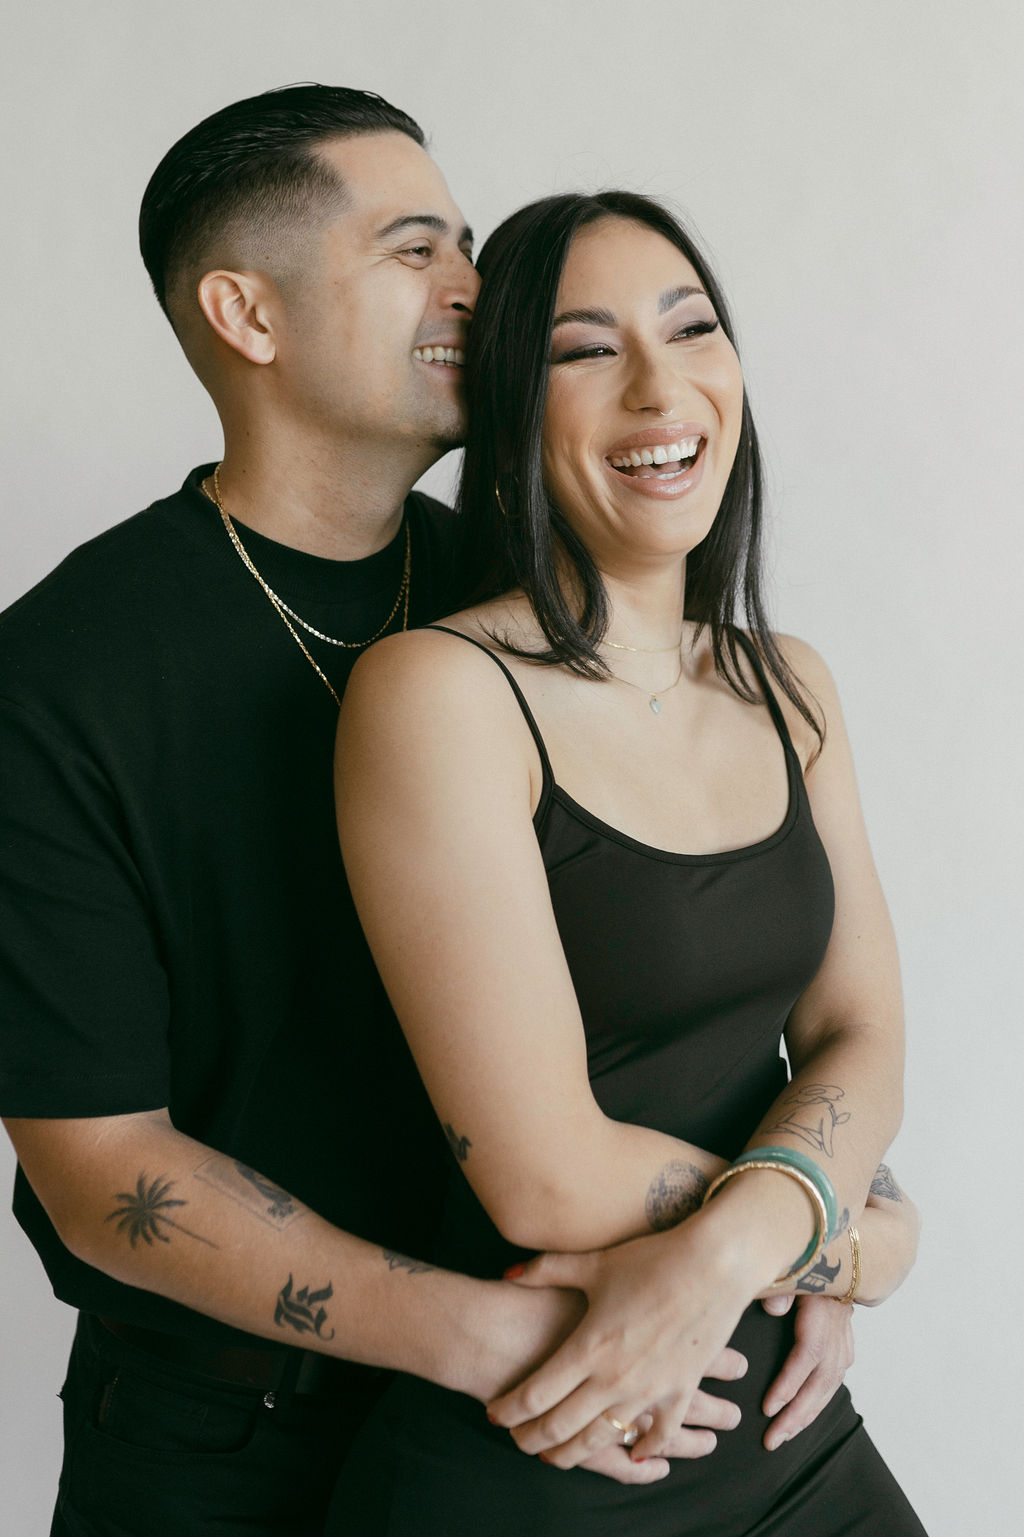 Edgy Studio Engagement Photos in Oakland, CA